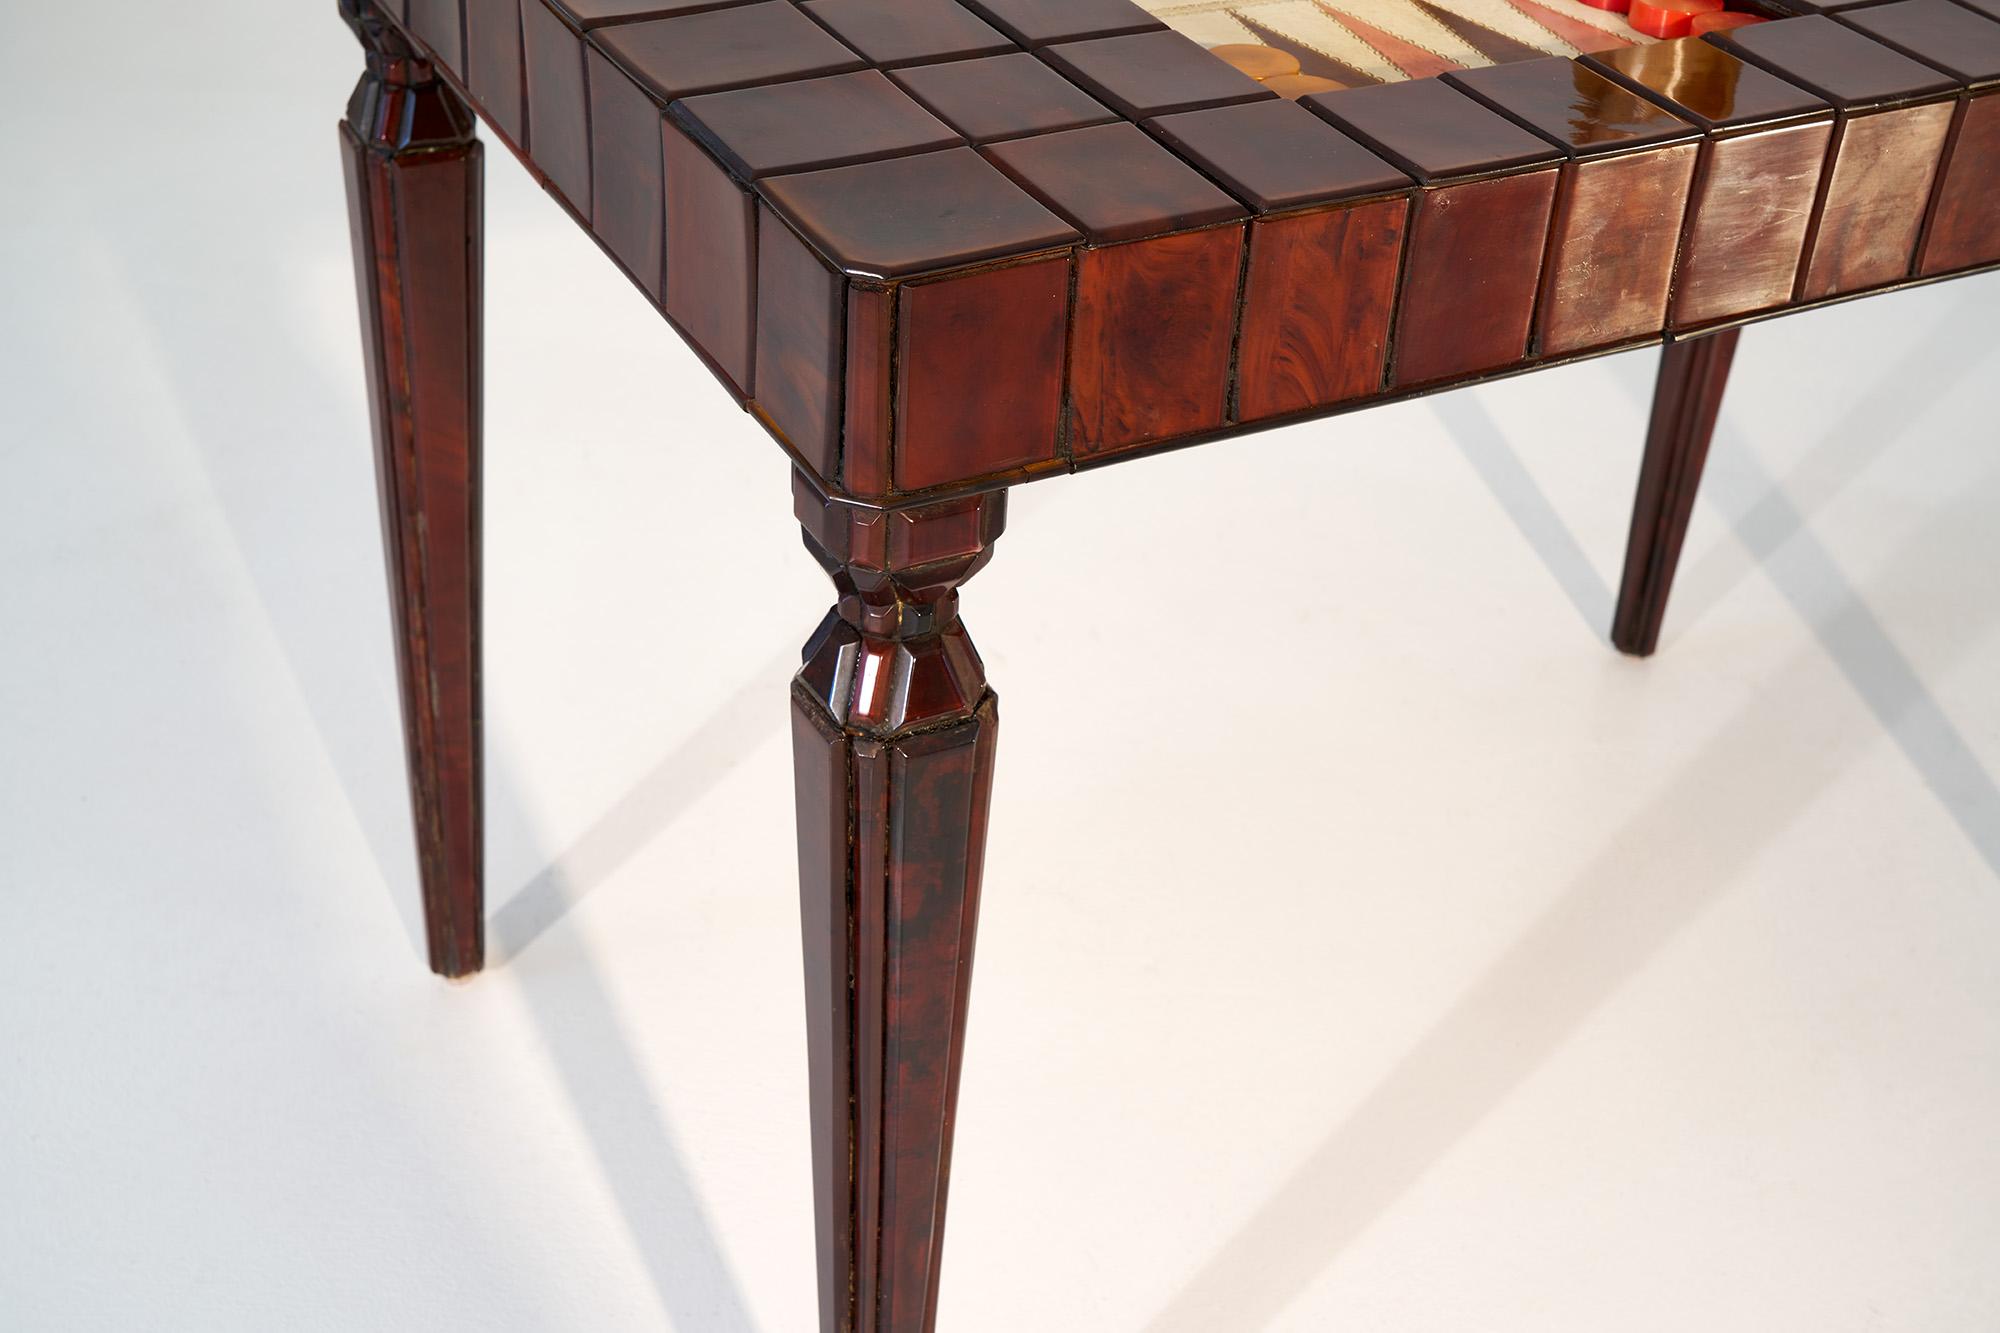 Polished A Bakelite and Leather Backgammon Table by William Haines